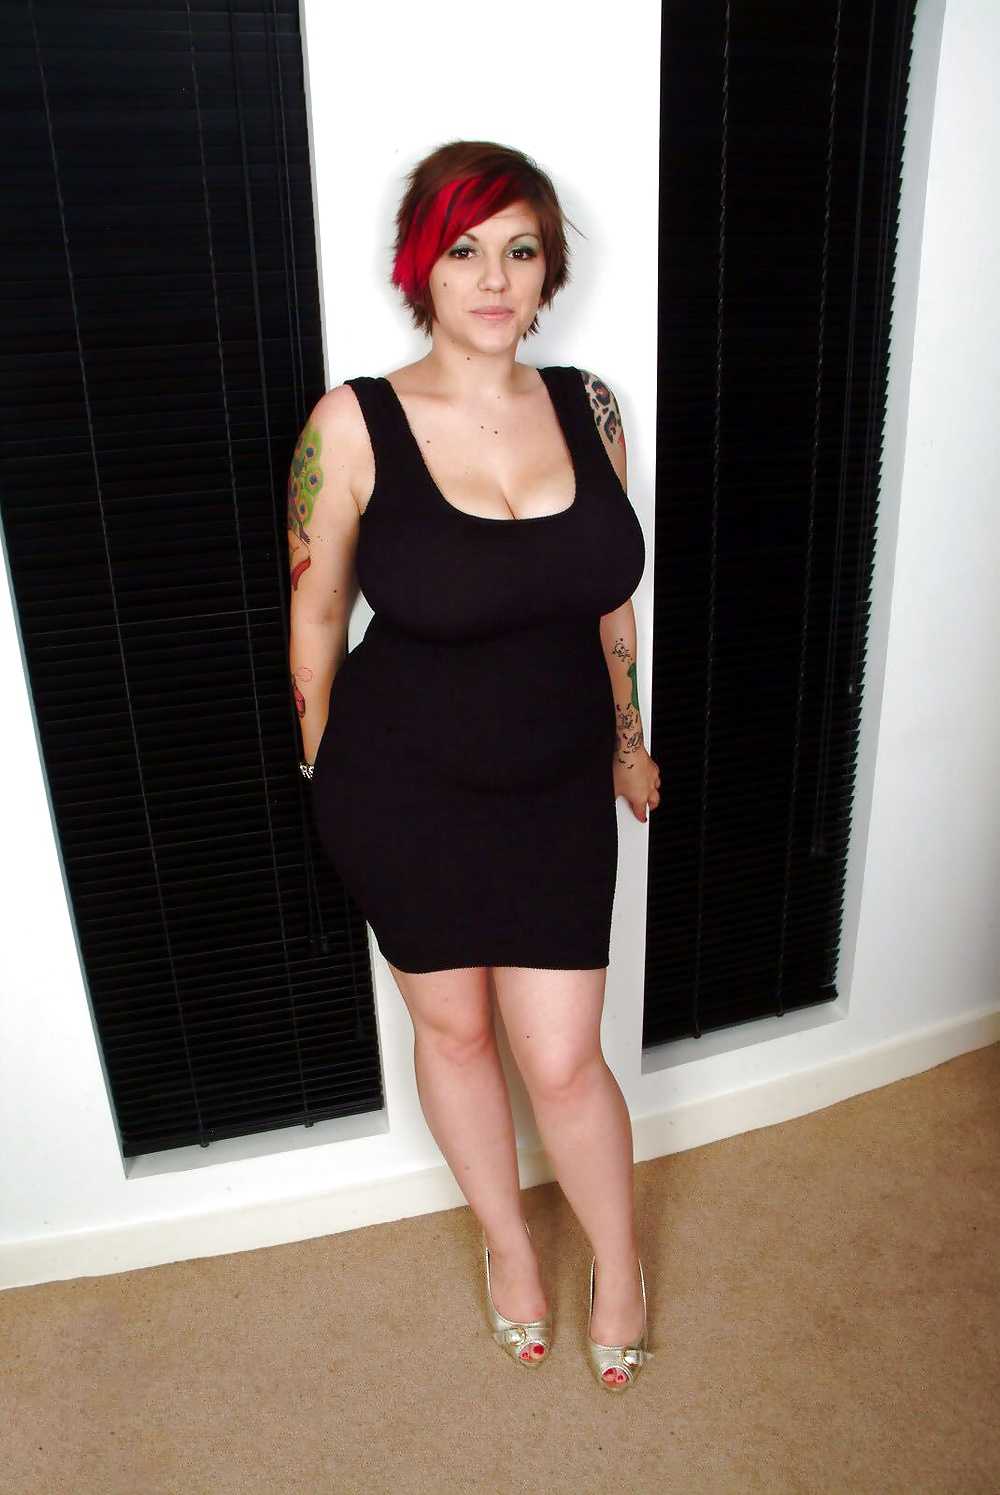 Curvy Beauties 69 Clothed Edition